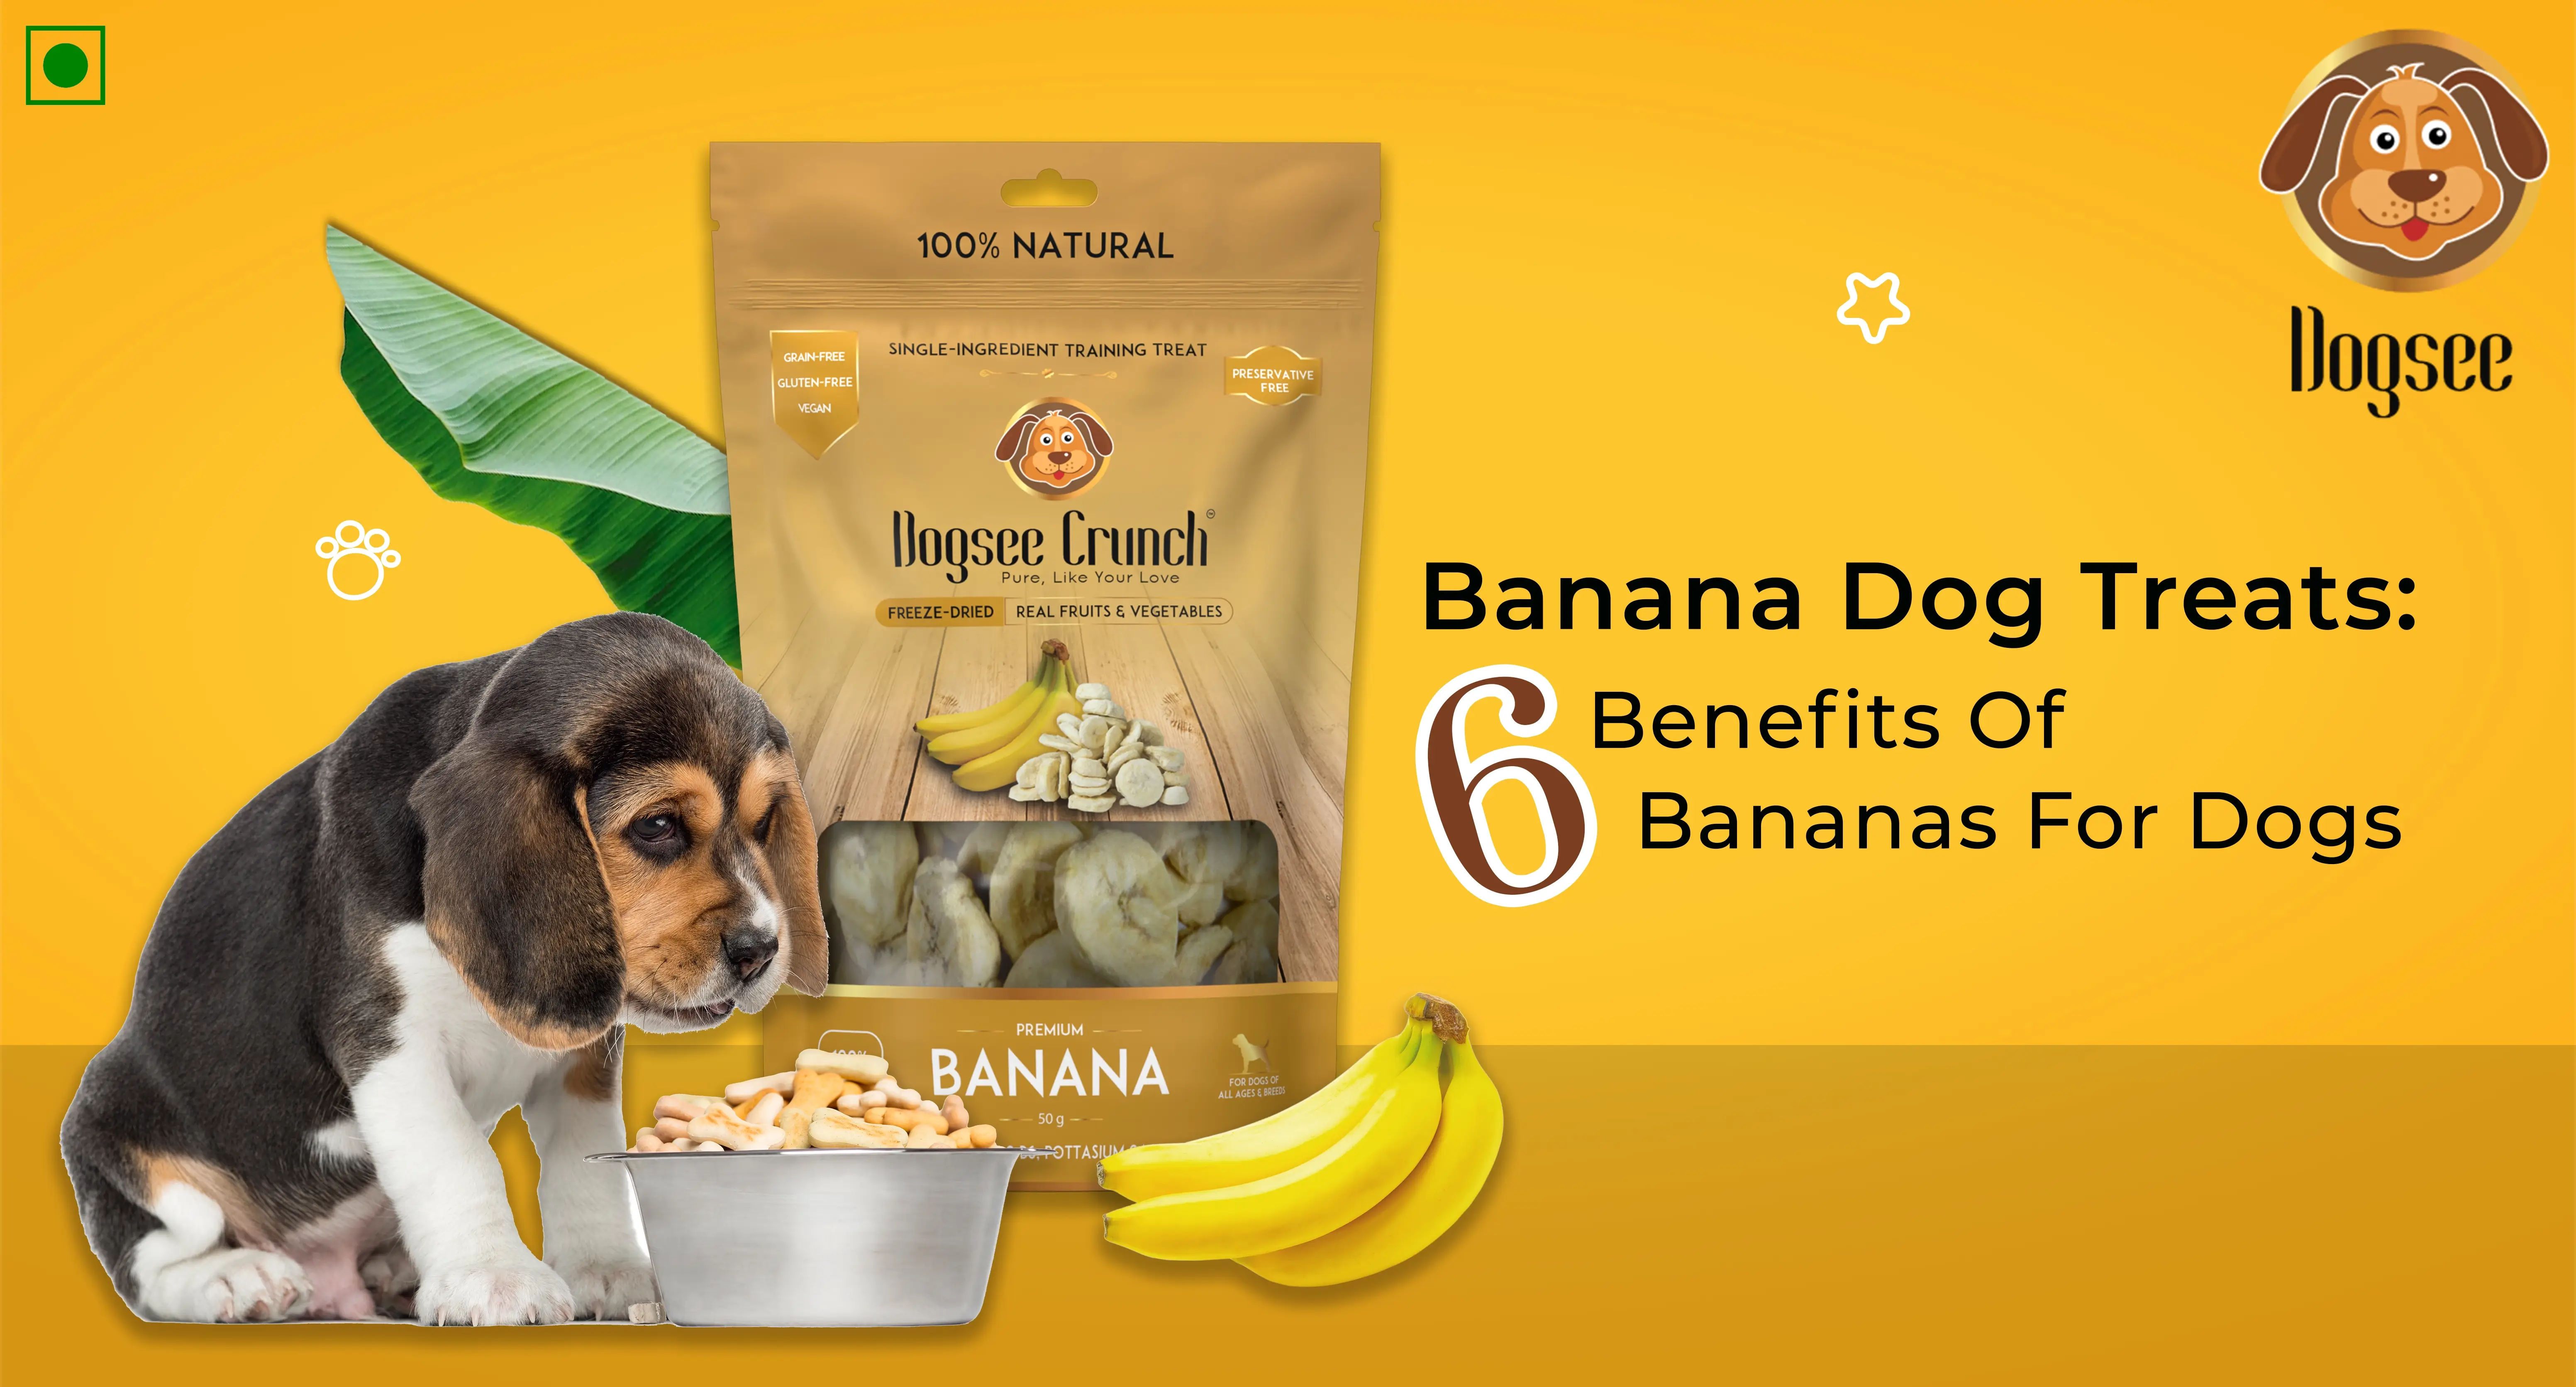 Benefits of Bananas For Dogs